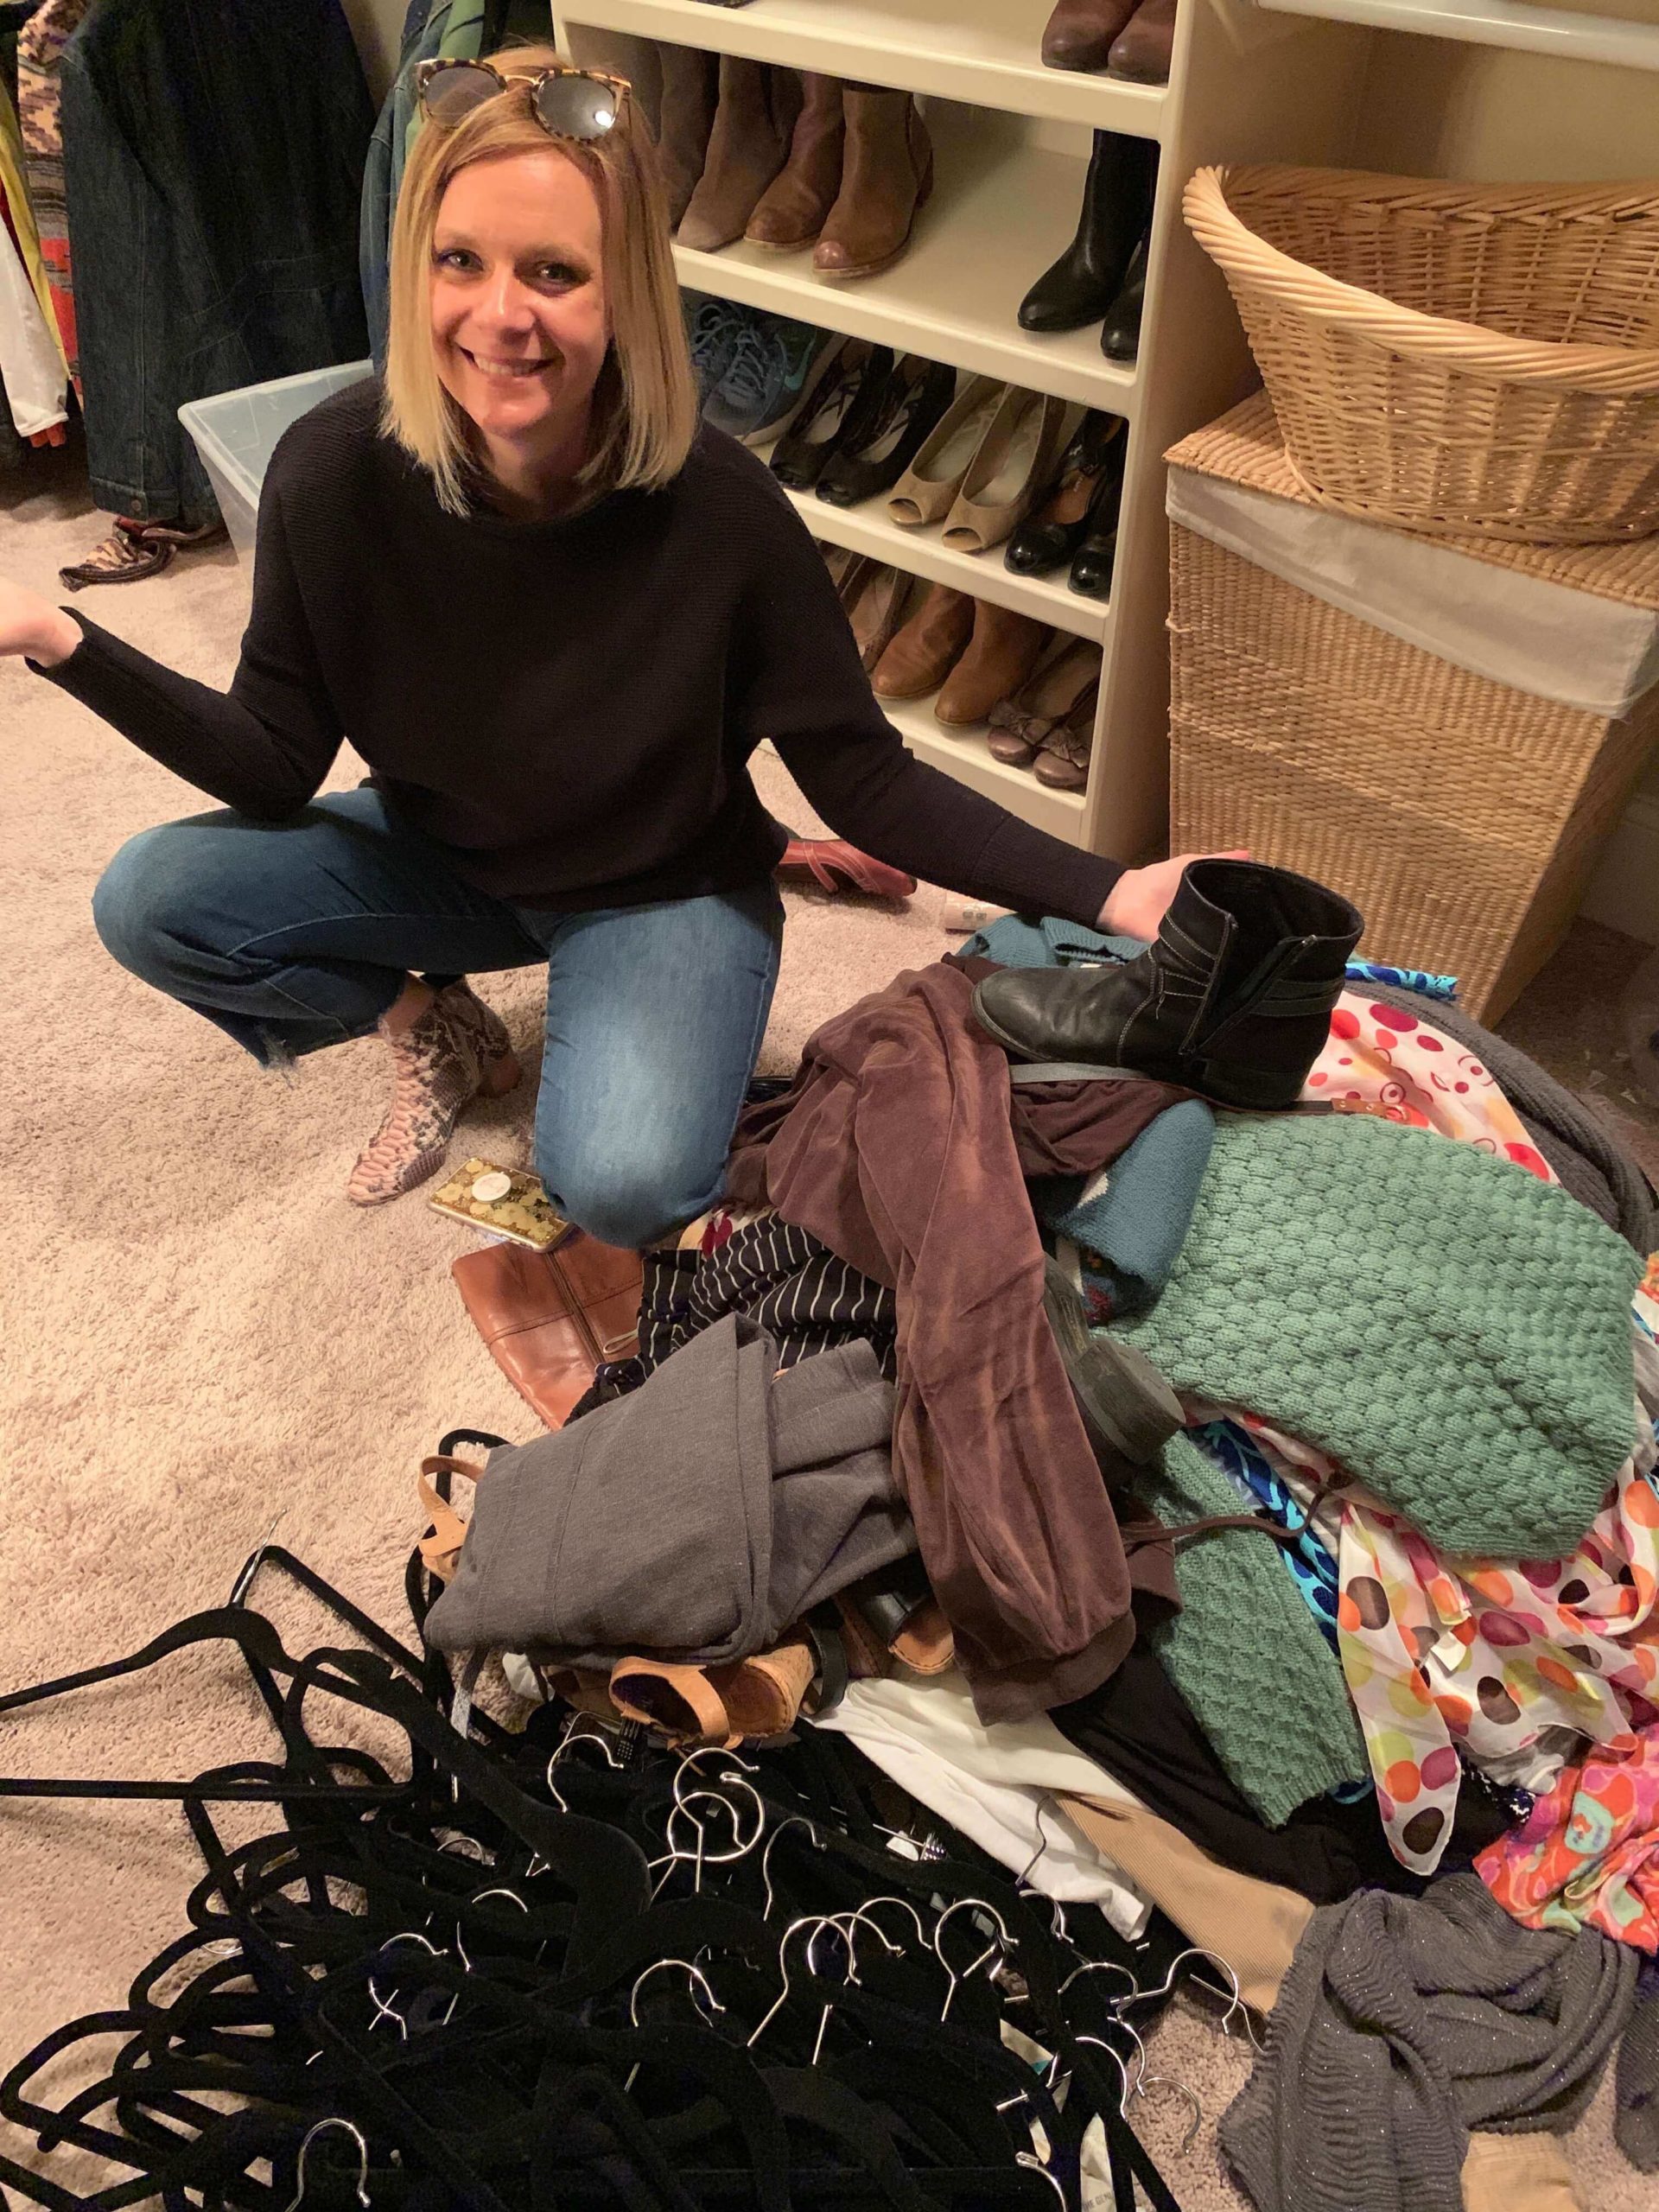 A Closet Audit: Why You Should Invest In One why it's worth the money to hire a stylist the value a stylist adds the importance of cleaning out your closet the importance of a streamlined closet